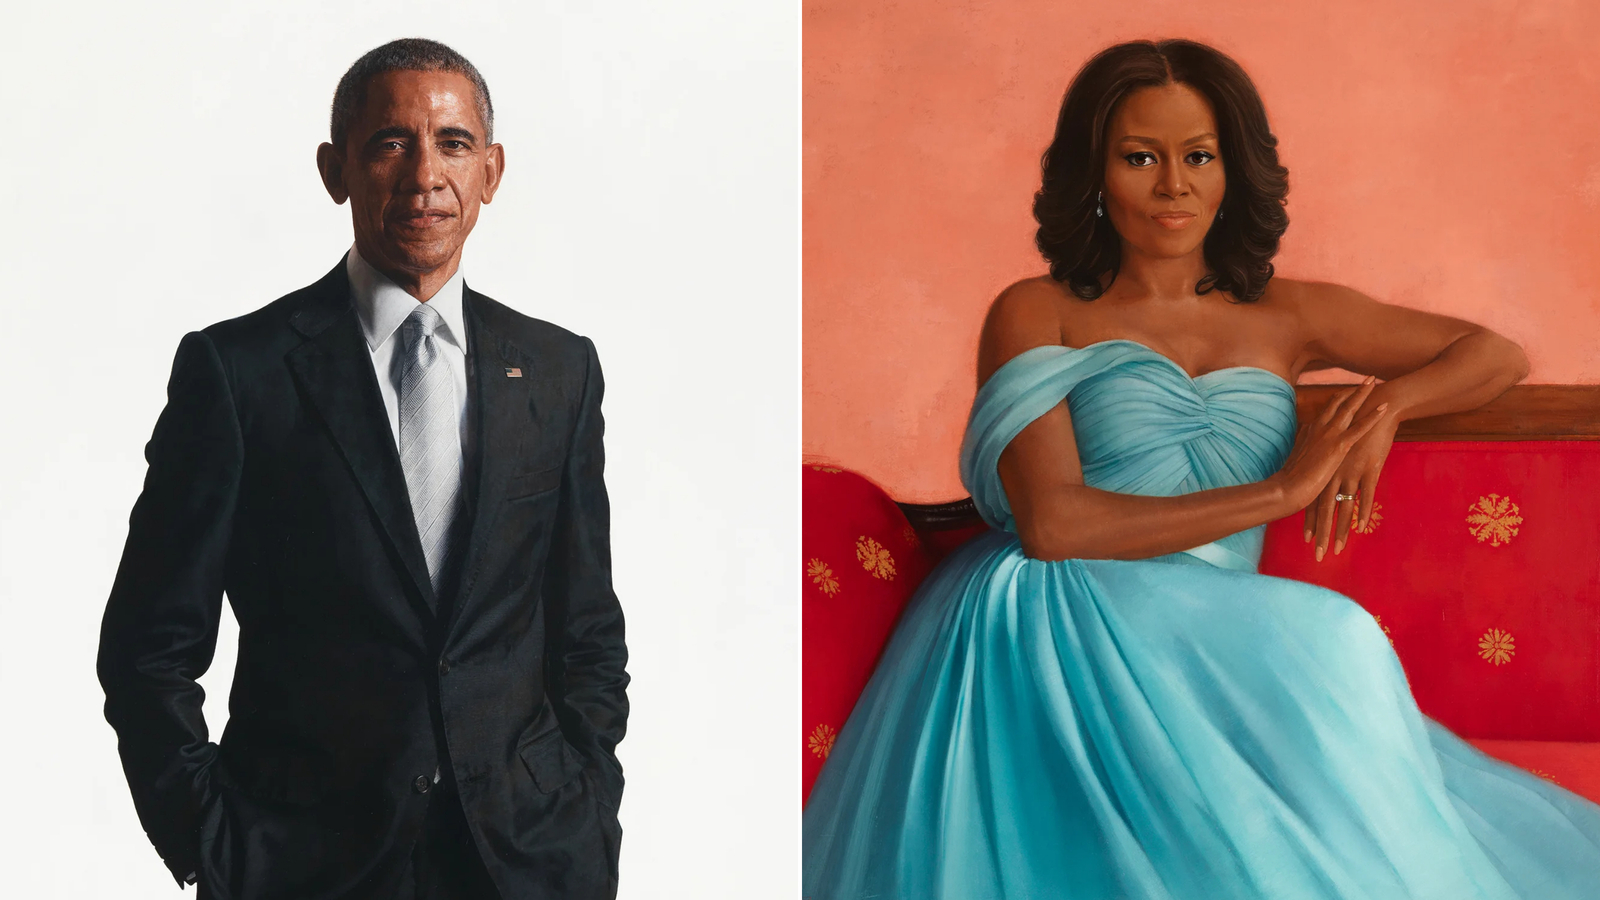 President Barack Obama's portrait was painted by Robert McCurdy. First lady Michelle Obama was painted by Sharon Sprung.